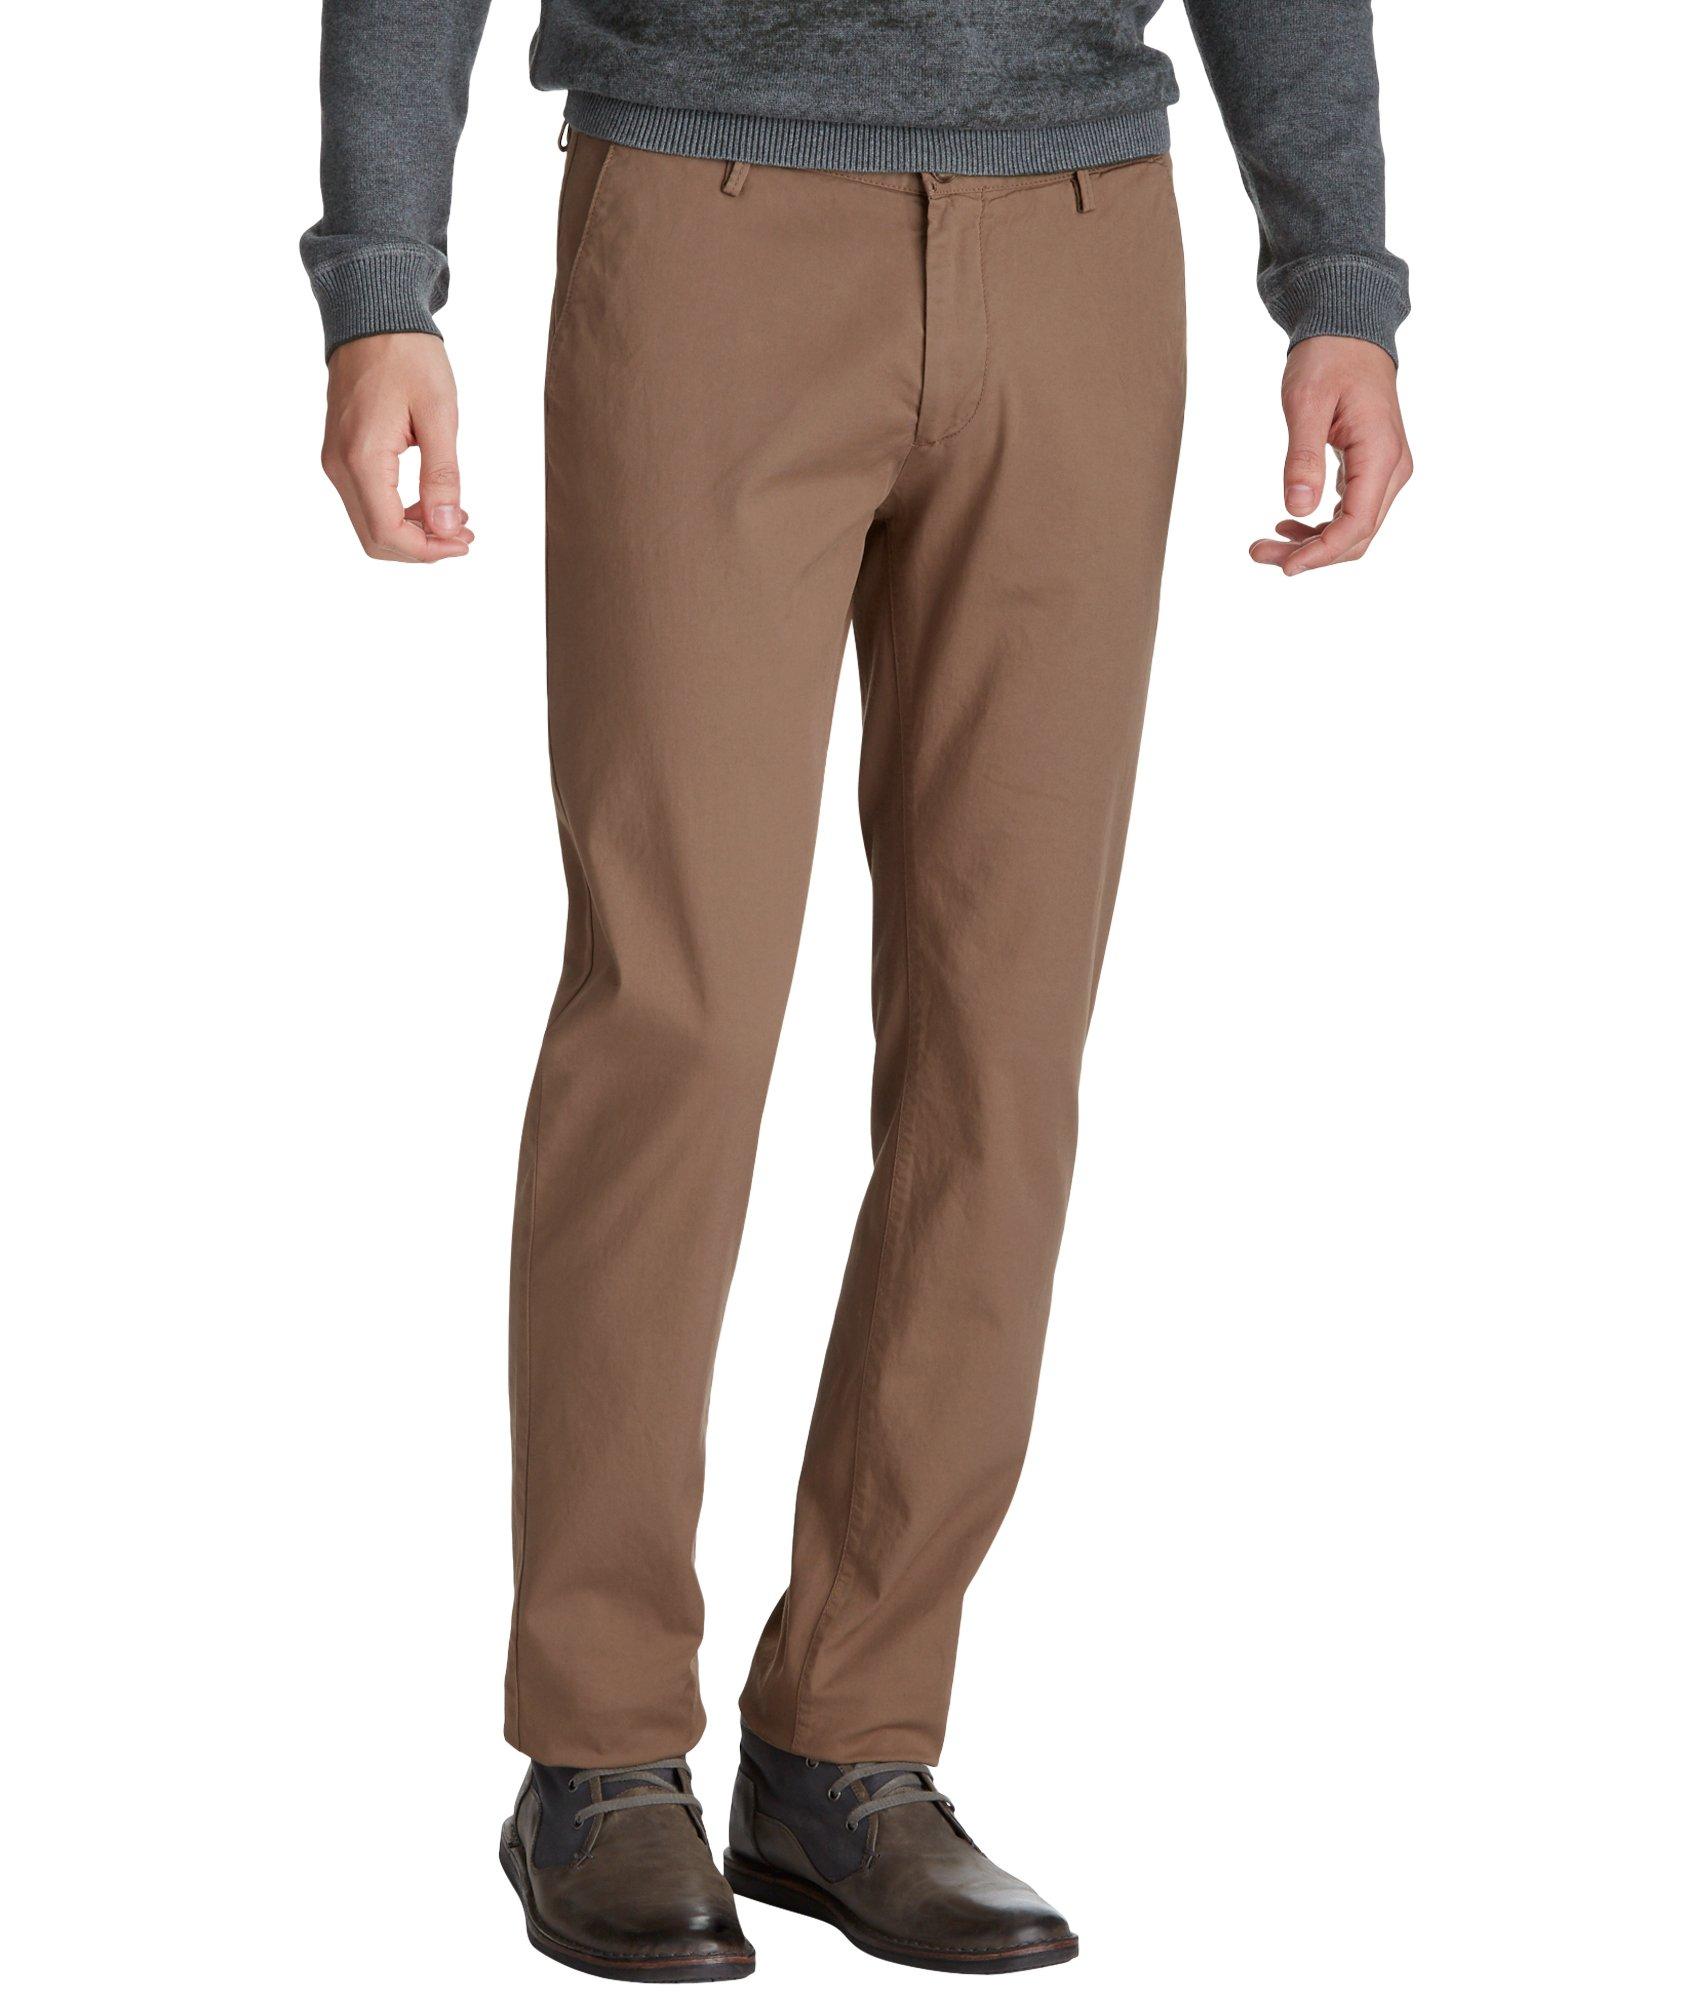 Rice Slim Fit Trousers image 0